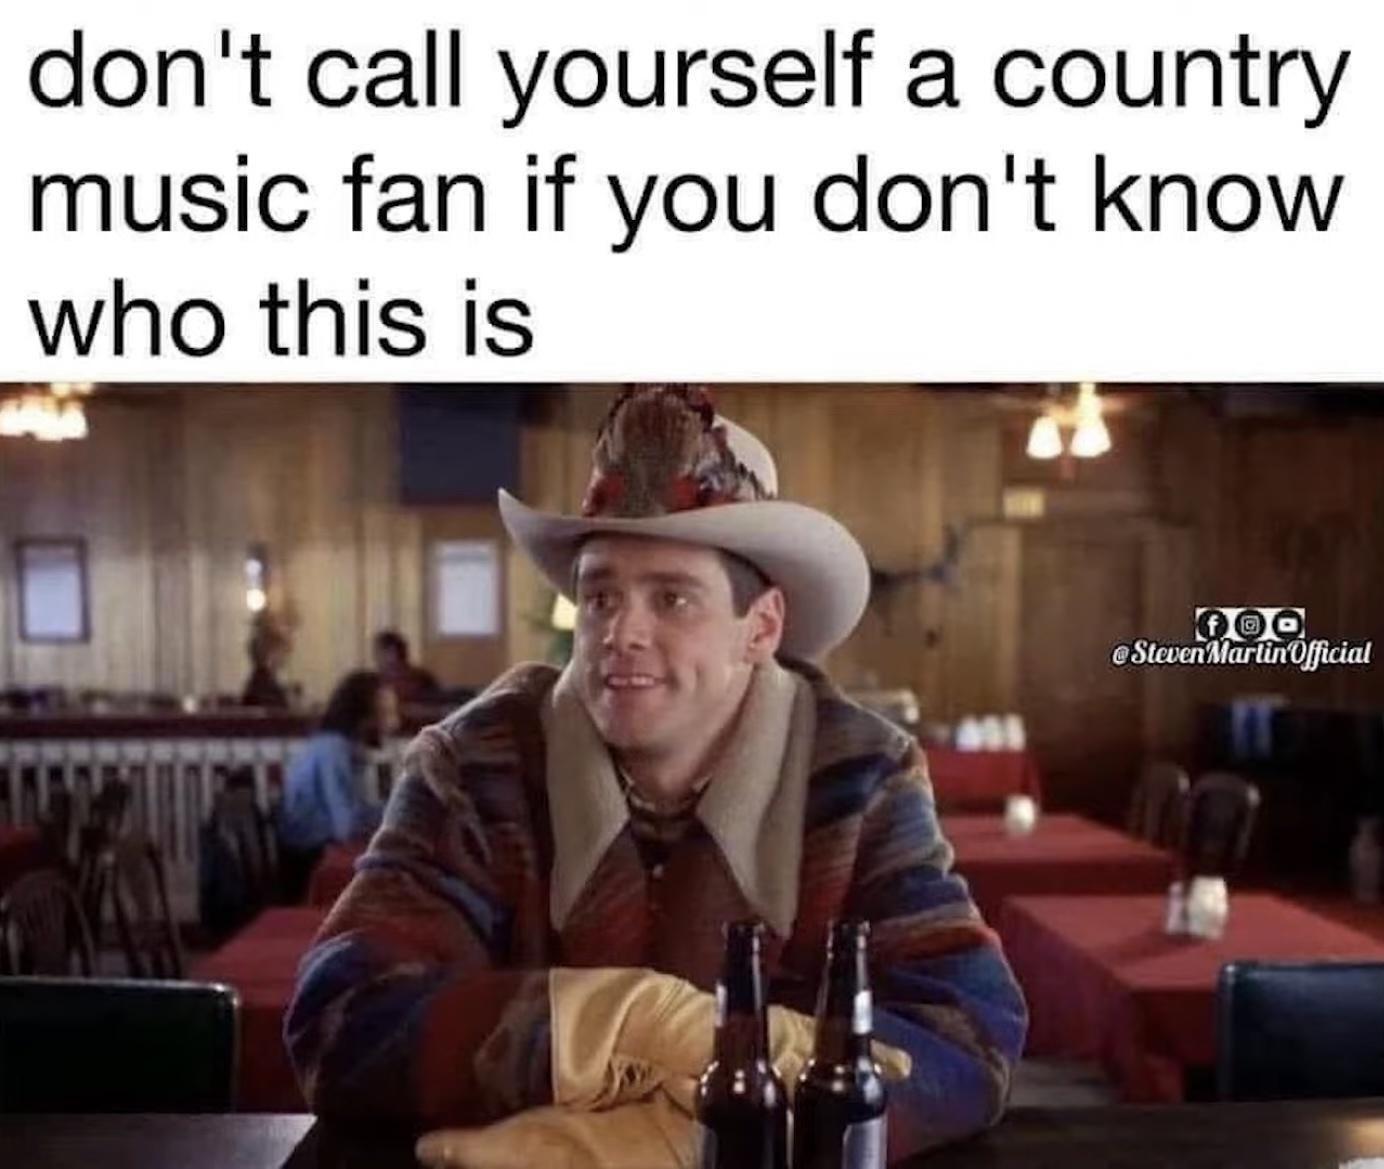 lloyd christmas cowboy - don't call yourself a country music fan if you don't know who this is Steven Martin Official